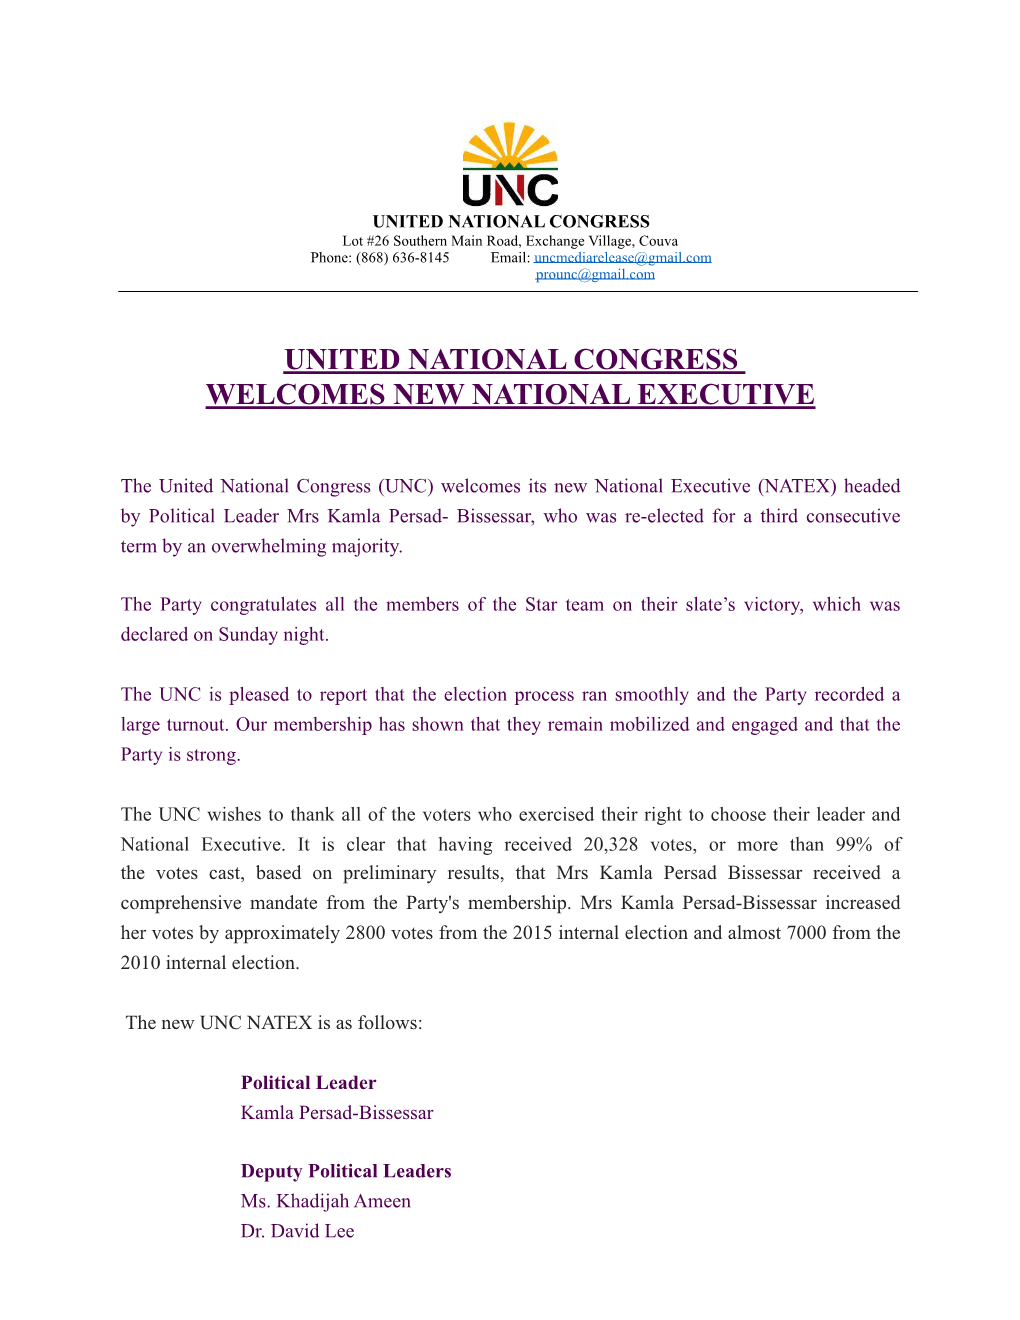 United National Congress Welcomes New National Executive